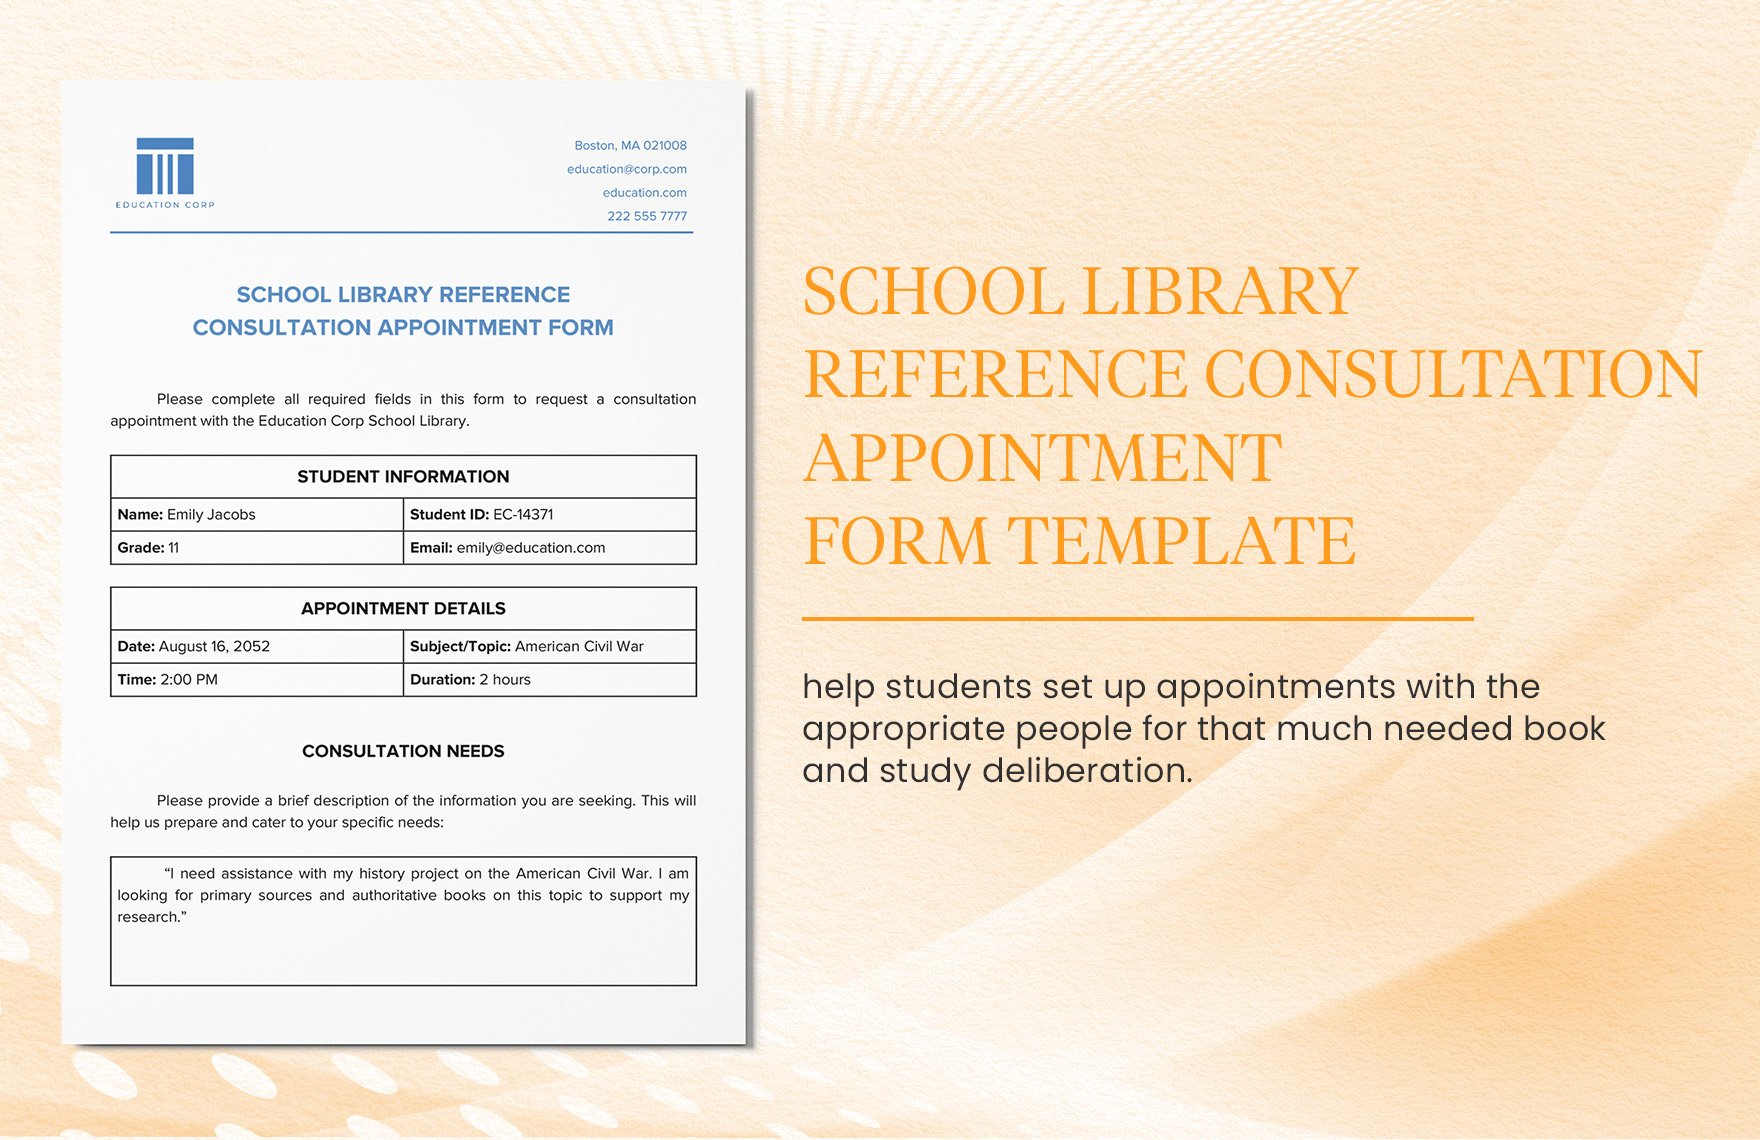 School Library Reference Consultation Appointment Form Template in Word, Google Docs, PDF